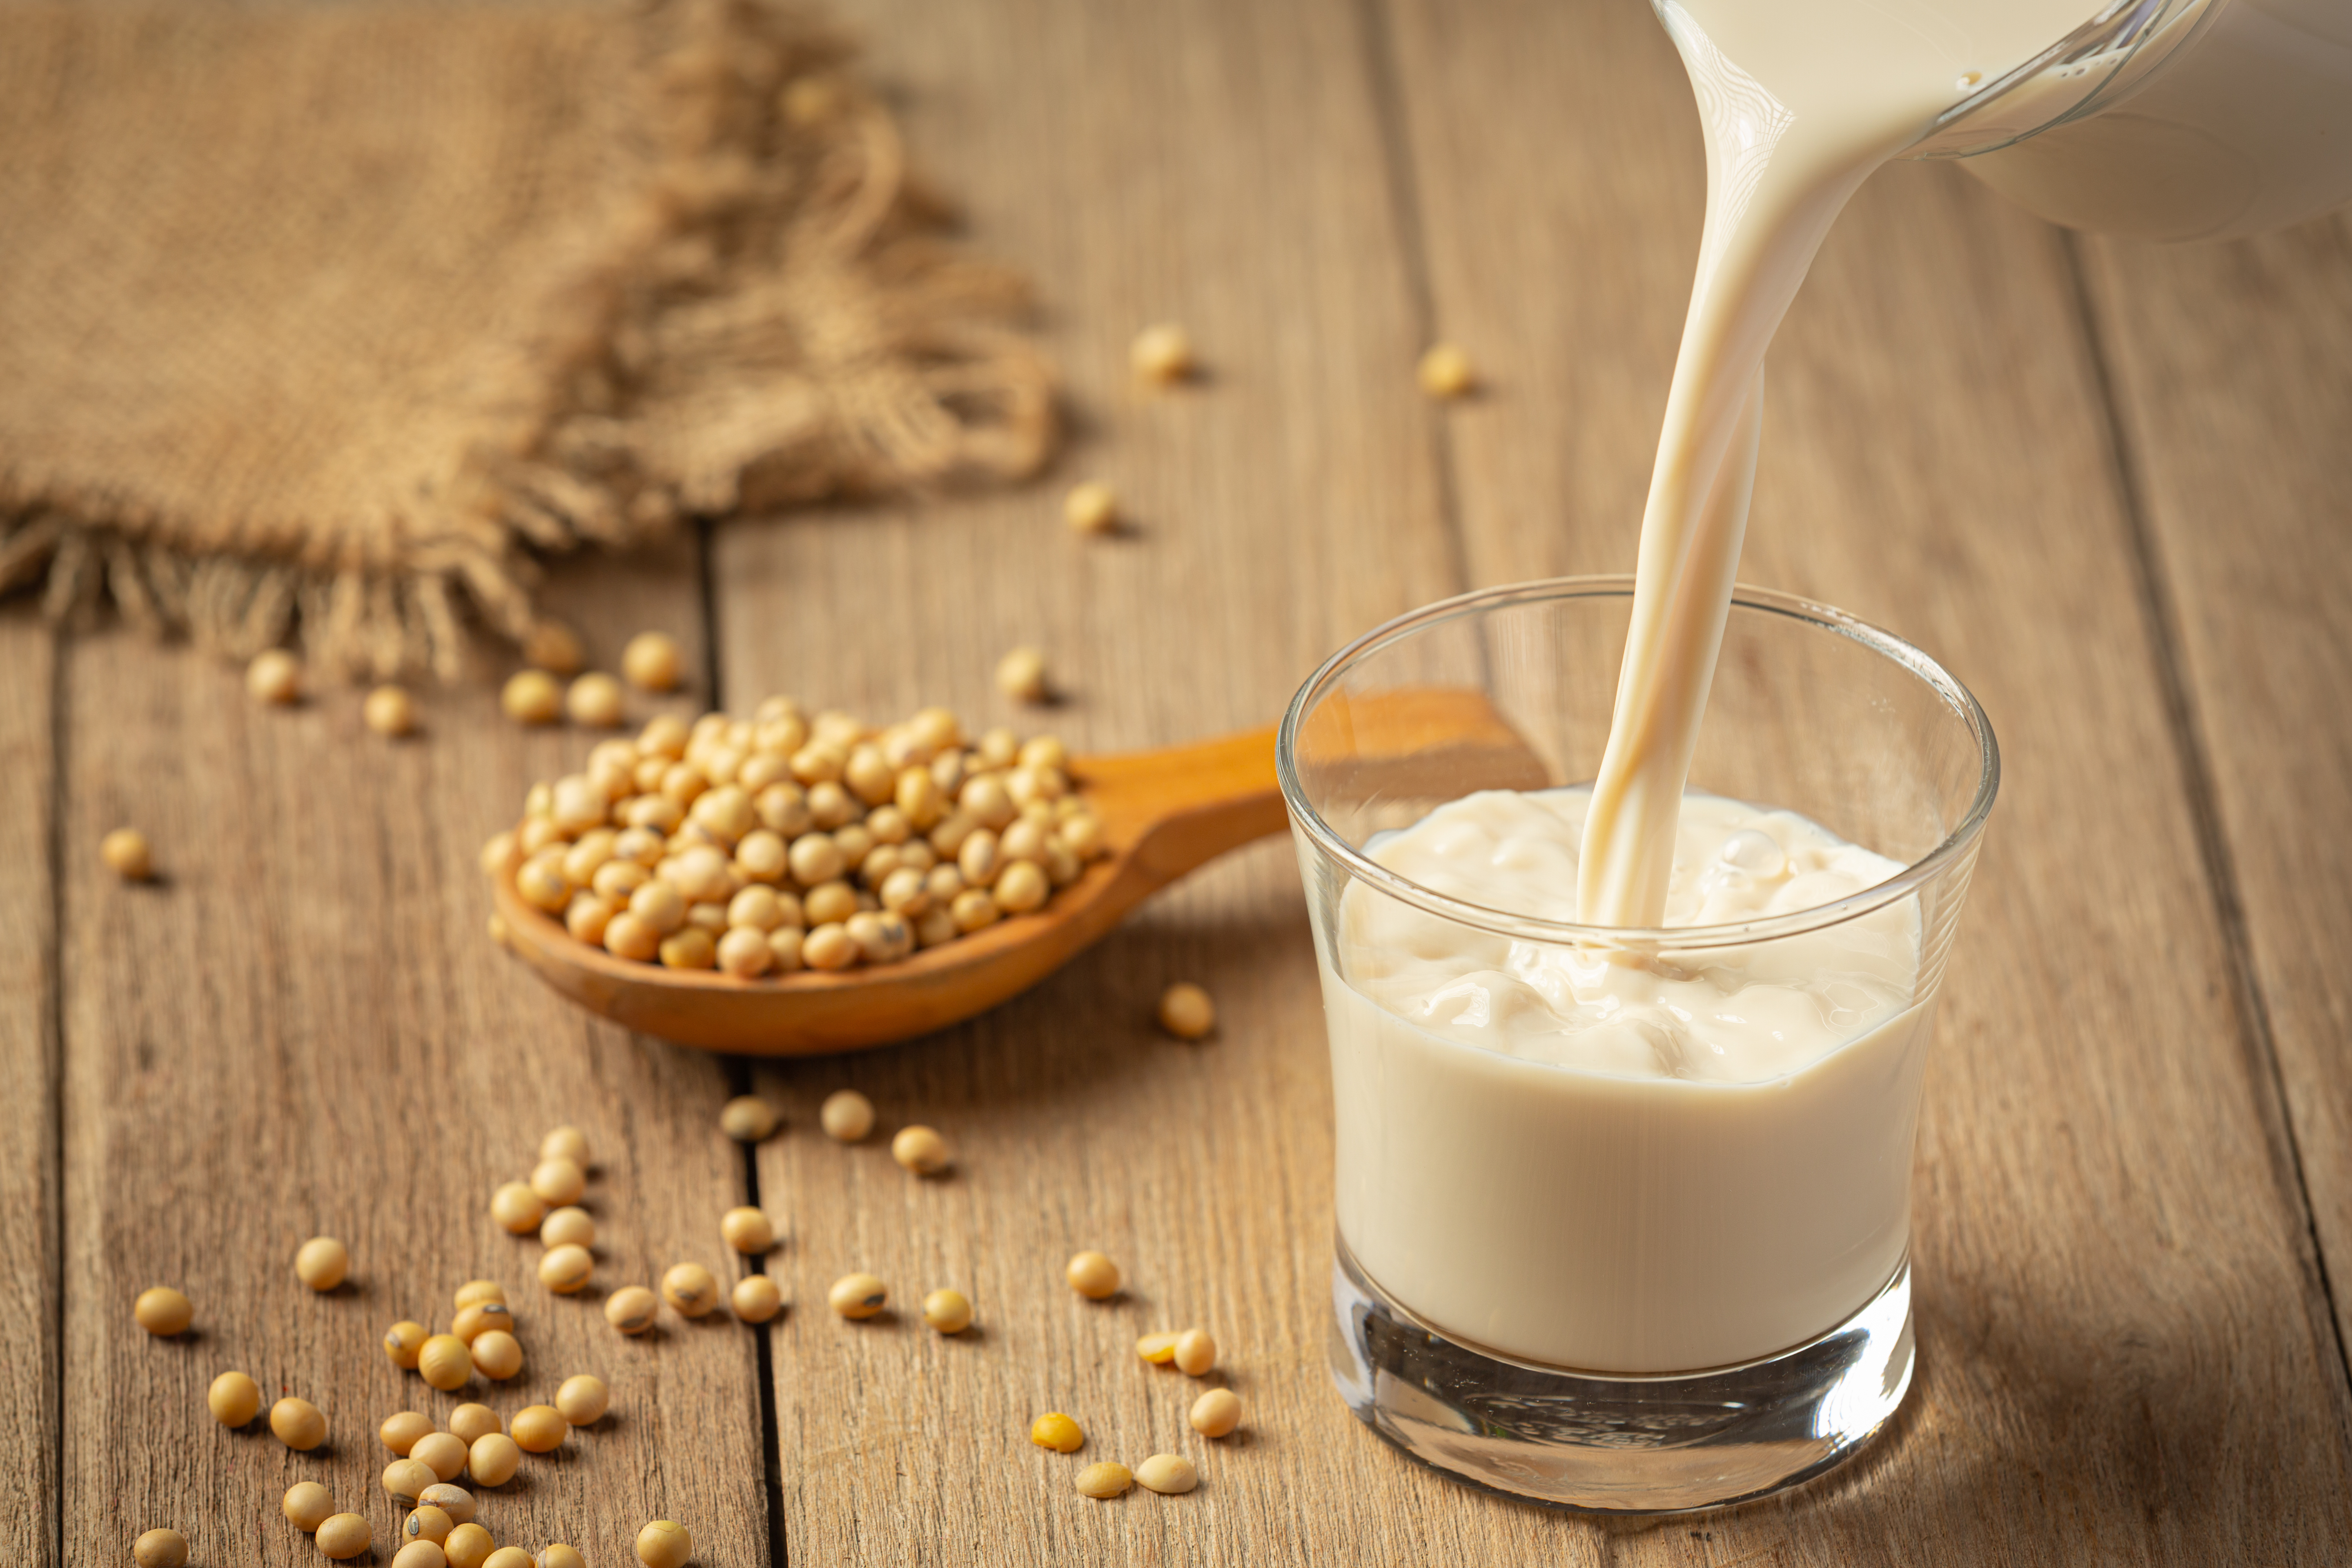 soy-milk-soy-food-beverage-products-food-nutrition-concept